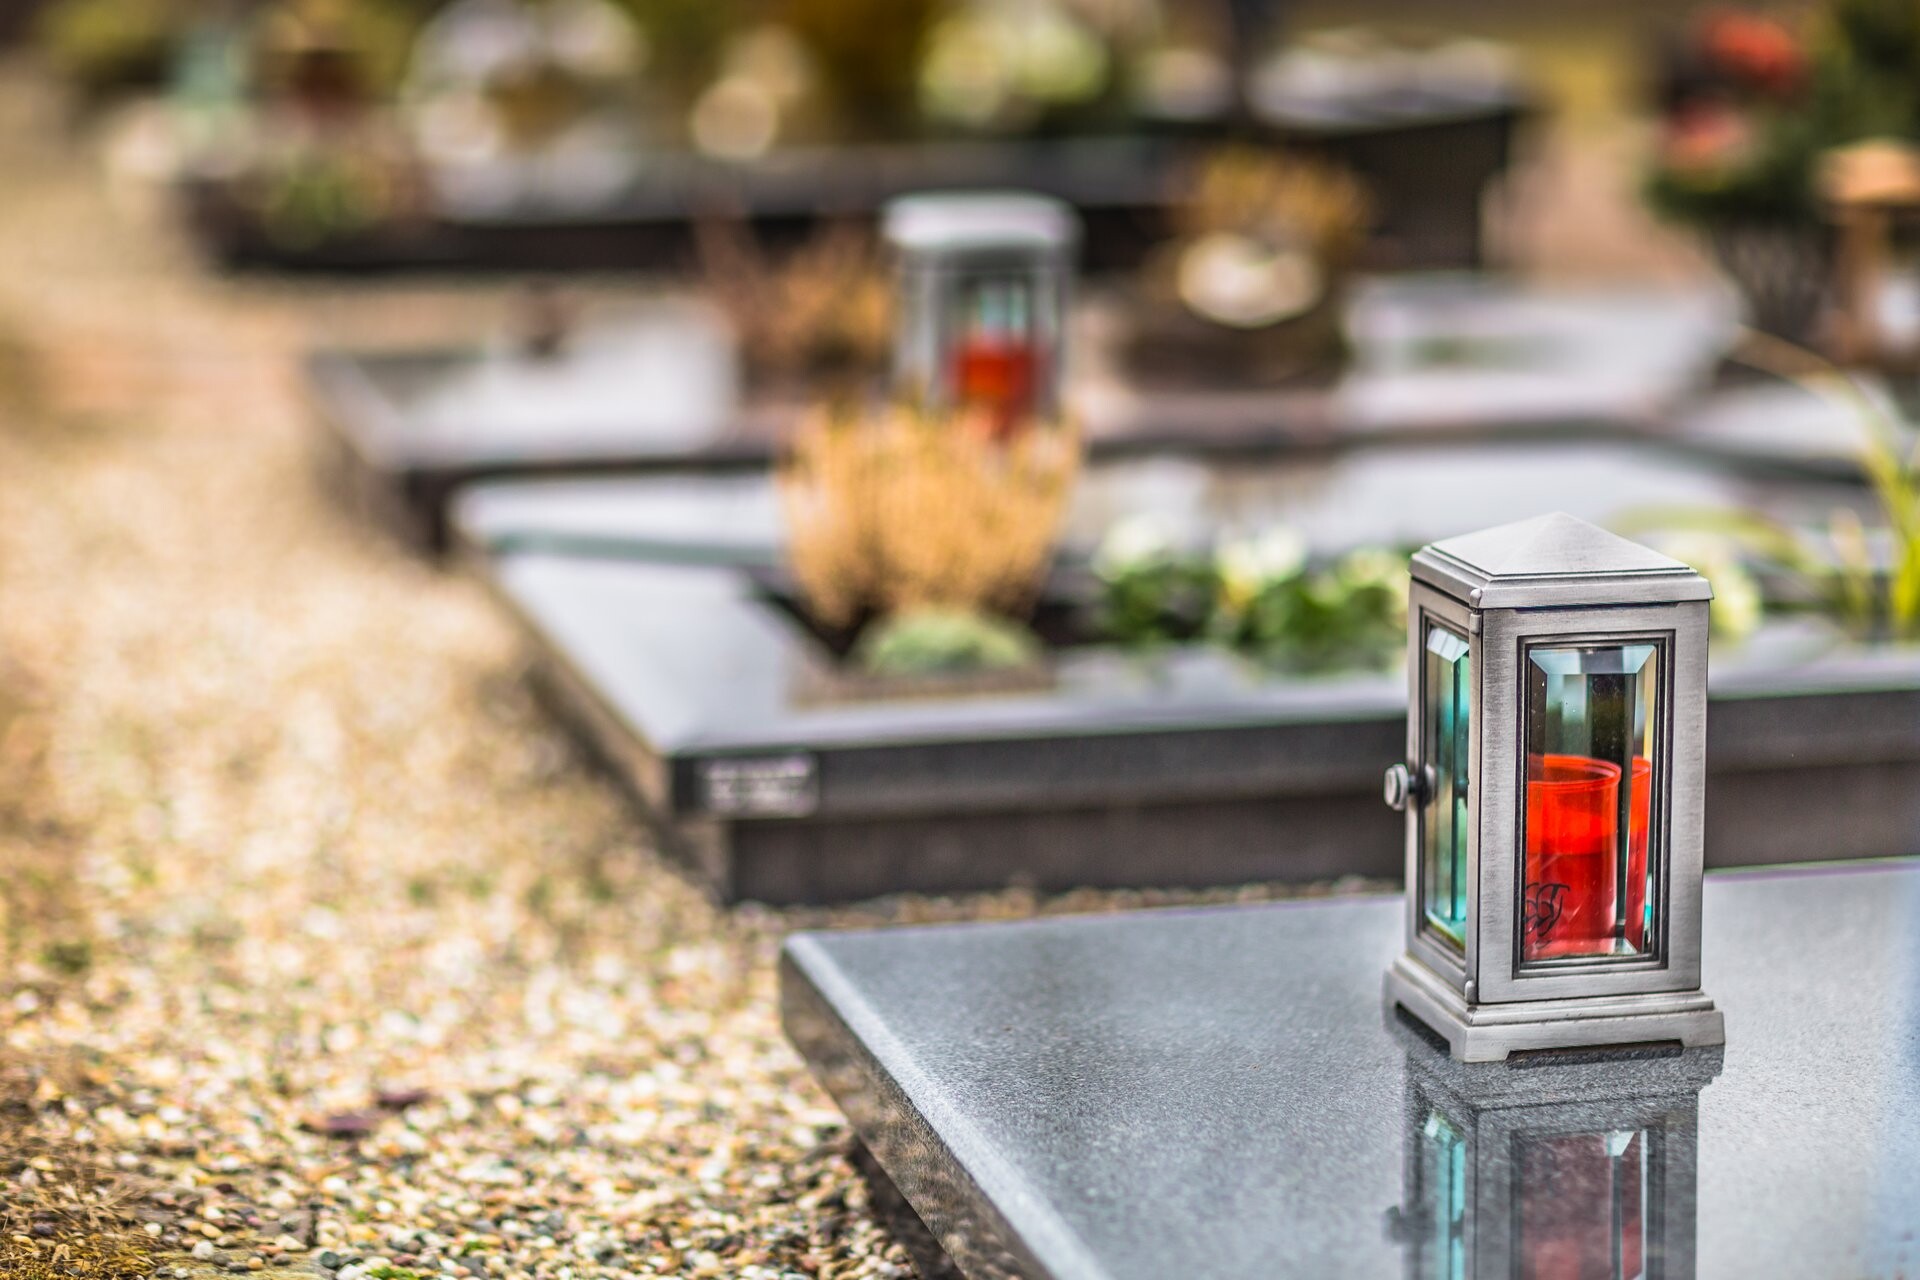 Graves in cemeteries are now equipped with technology